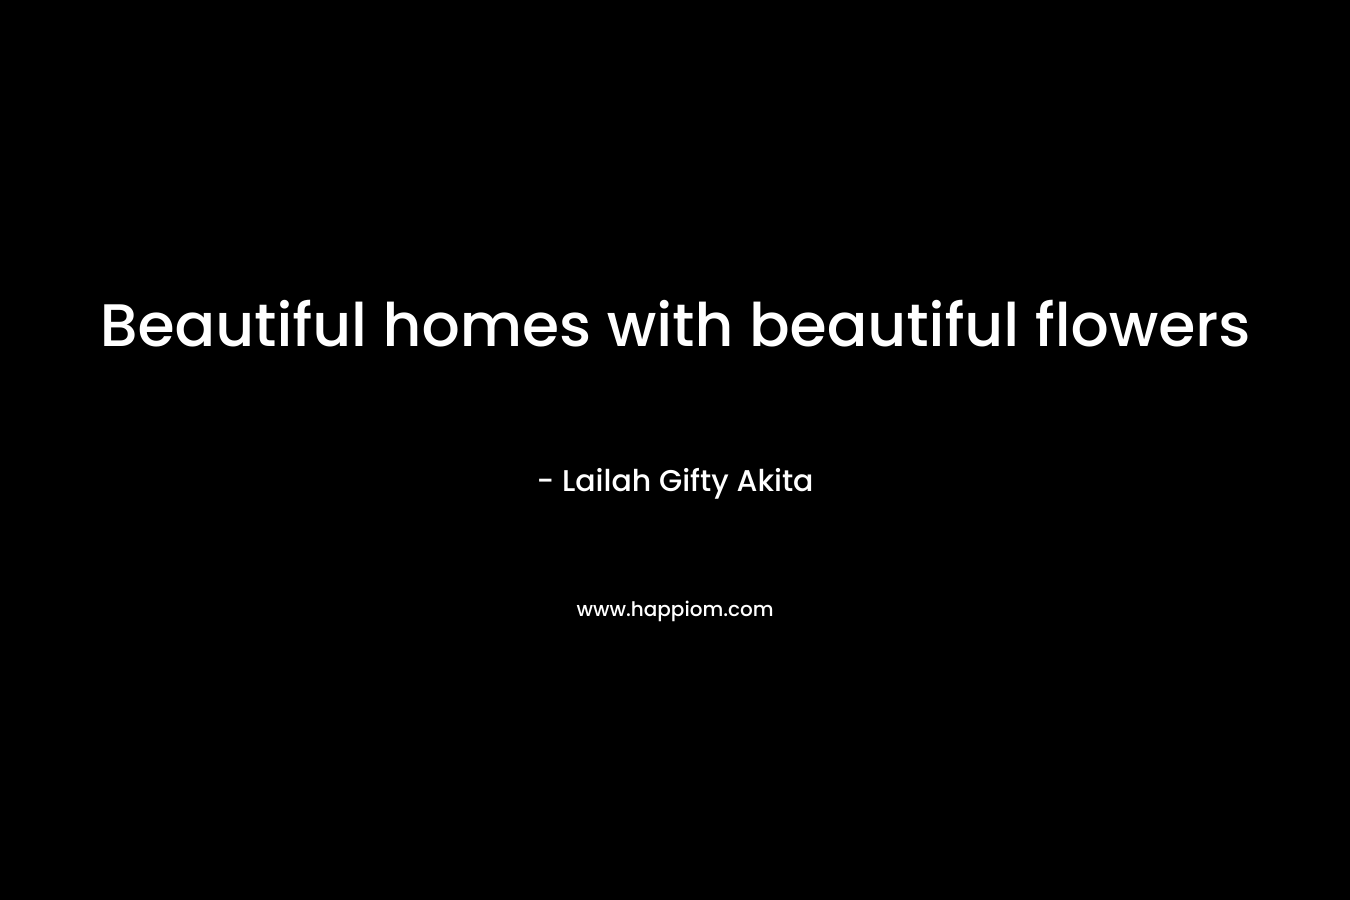 Beautiful homes with beautiful flowers